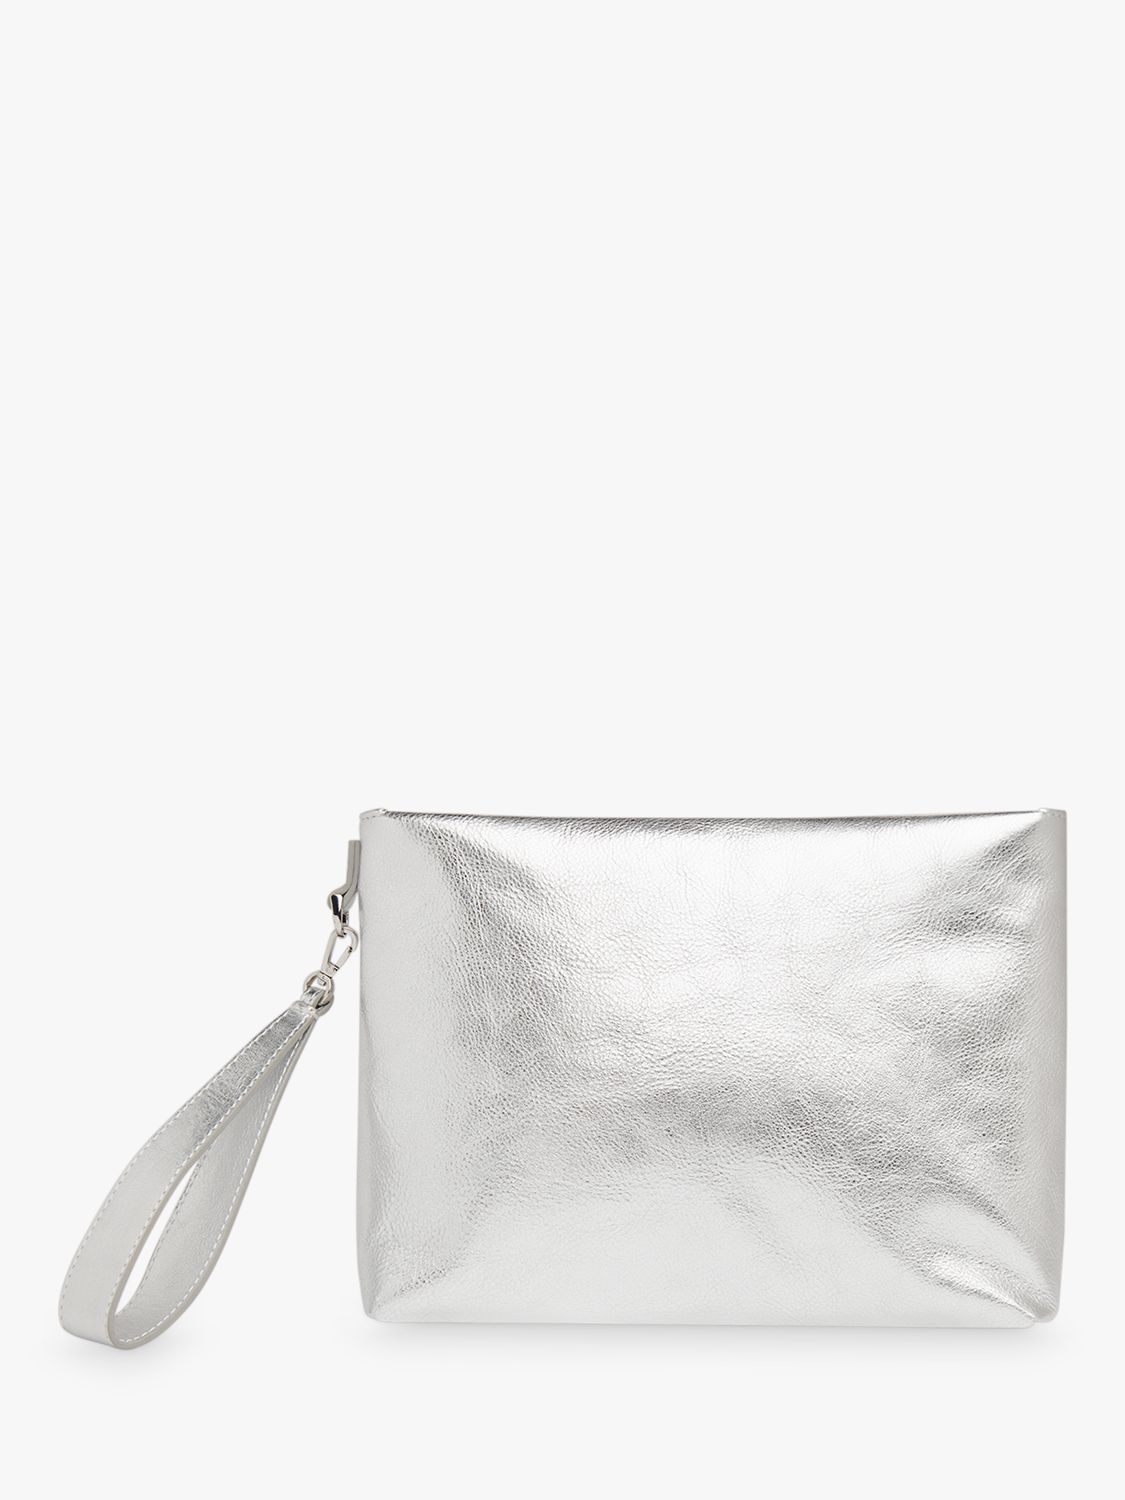 Whistles Avah Leather Zip Clutch Bag, Silver at John Lewis & Partners